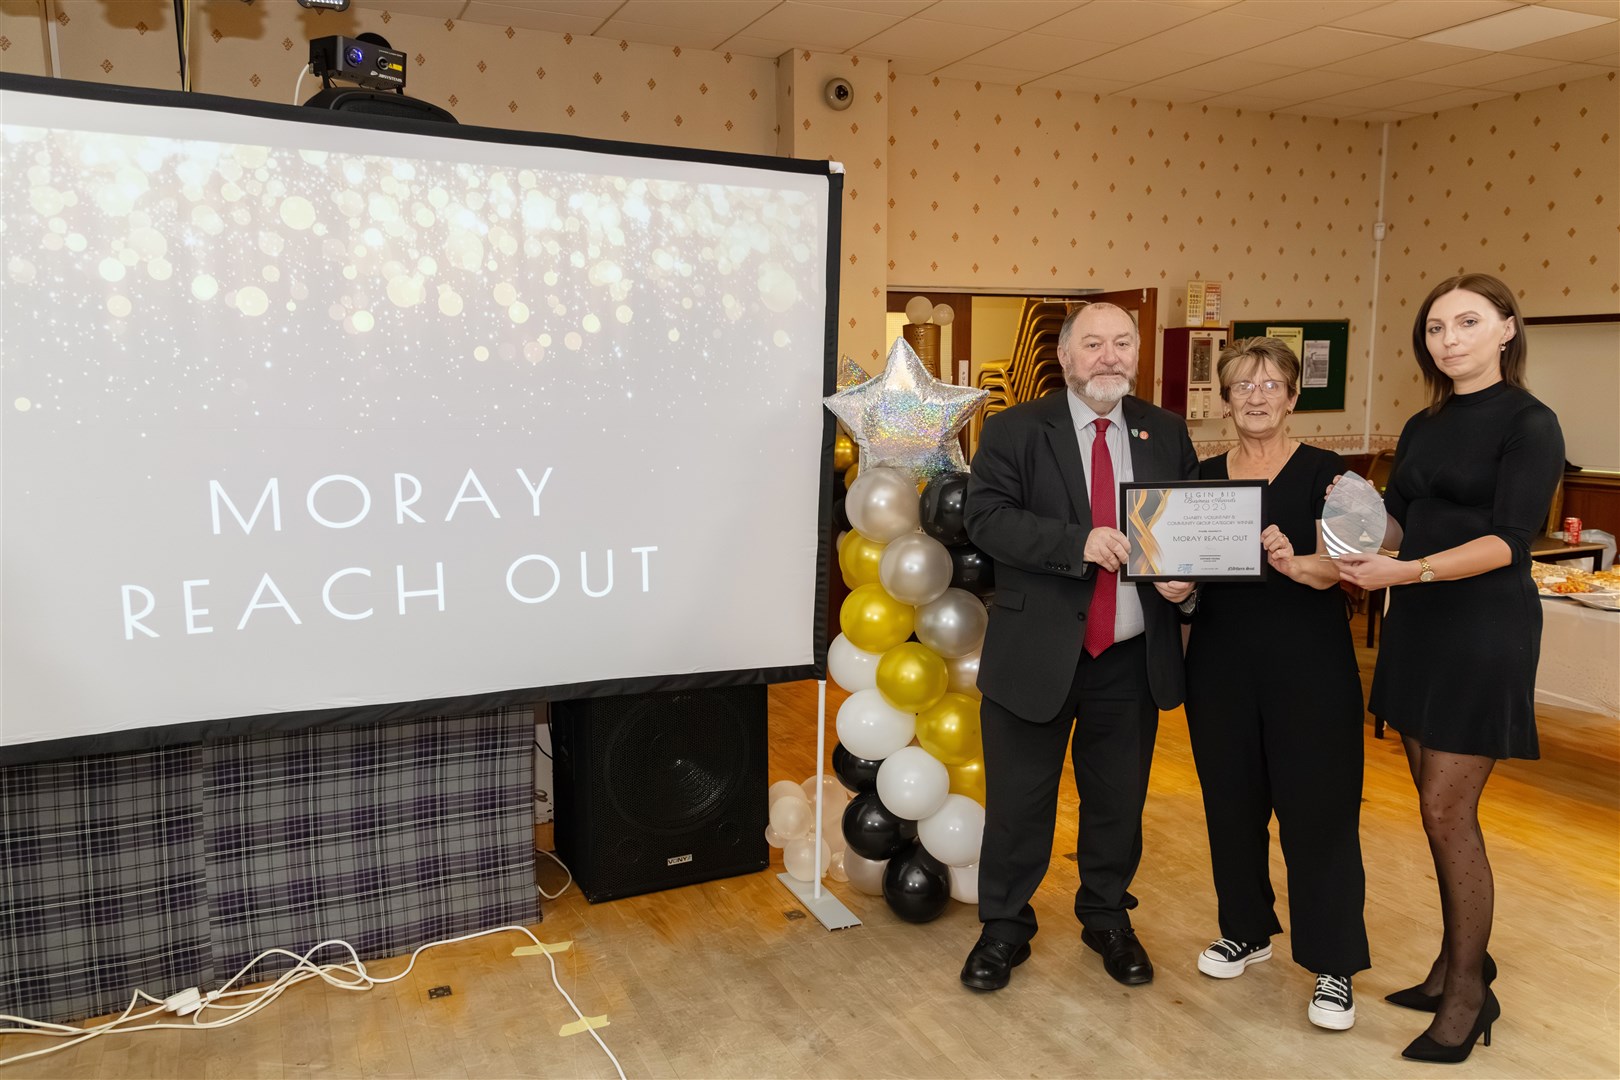 John Divers presenting the charity, voluntary and community Group award to Mo Wishart and Anna Bebas from Moray Reach Out. Picture: Beth Taylor.